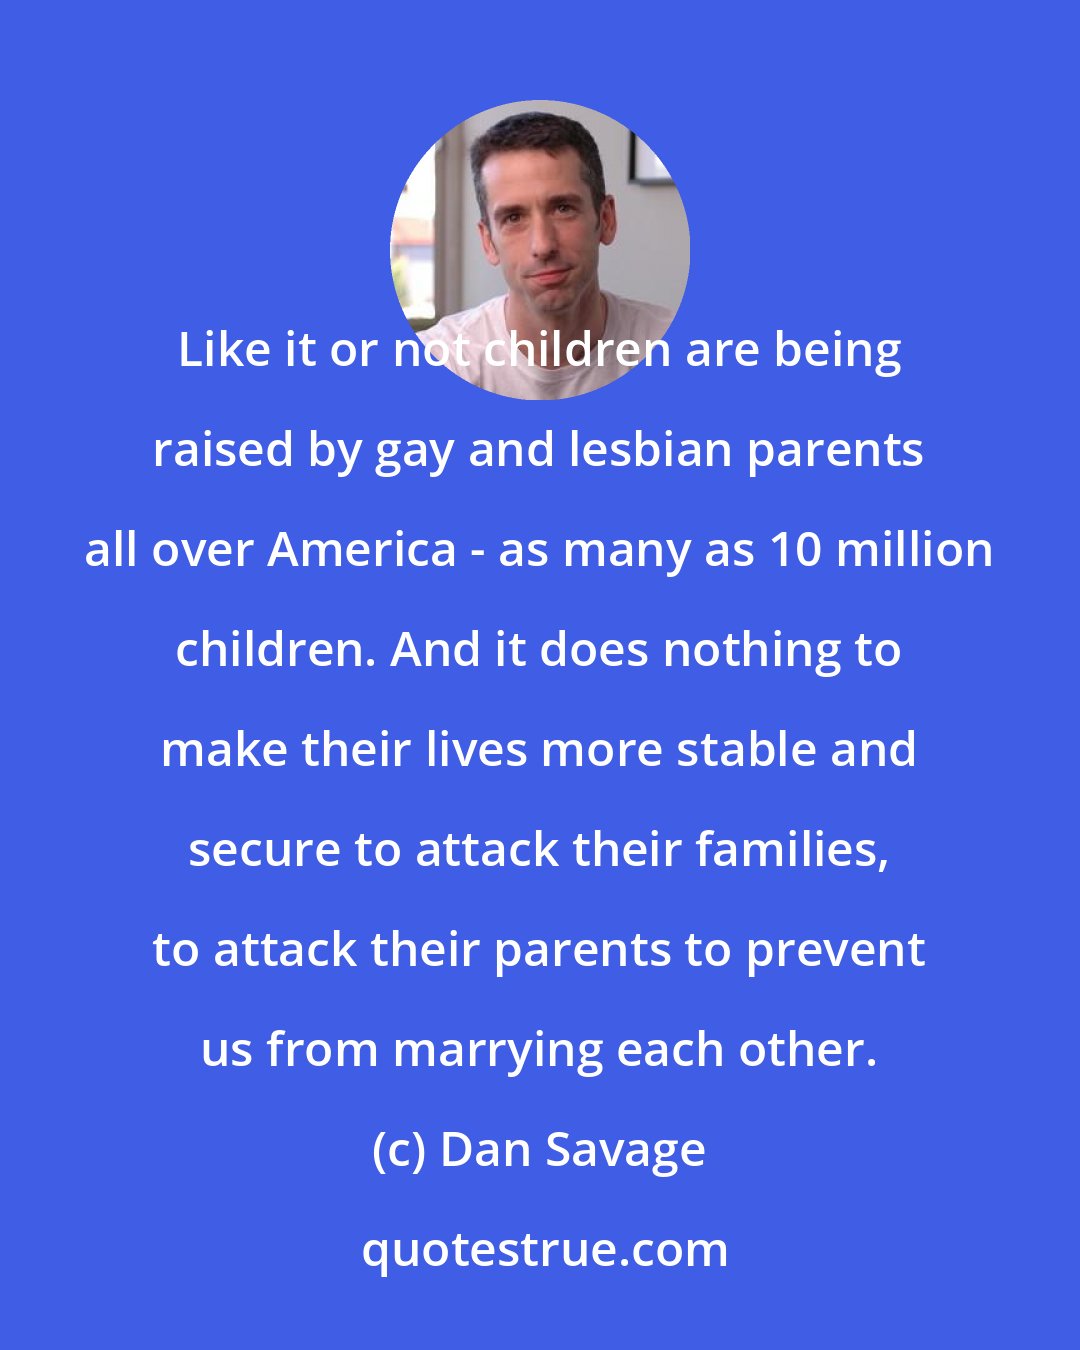 Dan Savage: Like it or not children are being raised by gay and lesbian parents all over America - as many as 10 million children. And it does nothing to make their lives more stable and secure to attack their families, to attack their parents to prevent us from marrying each other.